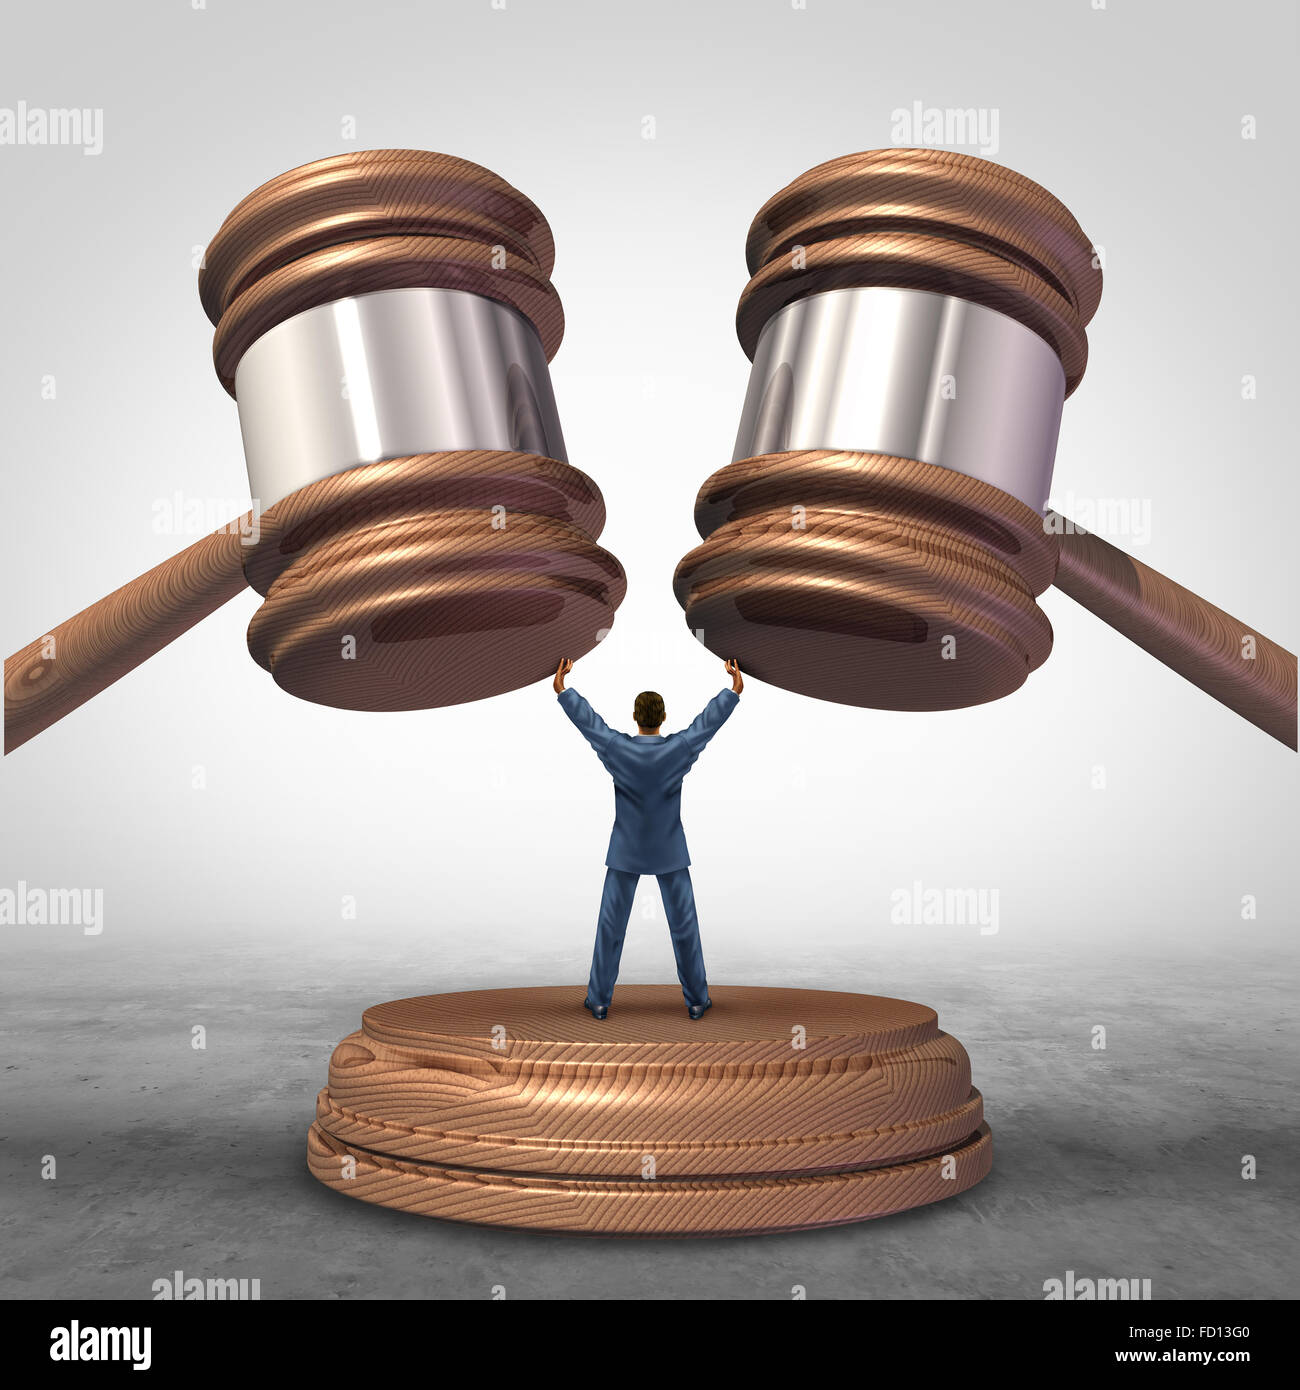 Mediation resolution and mediate legal disputes in business as a concept with a businessman or lawyer separating two judge mallets or gavel as competitors in arbitration. Stock Photo